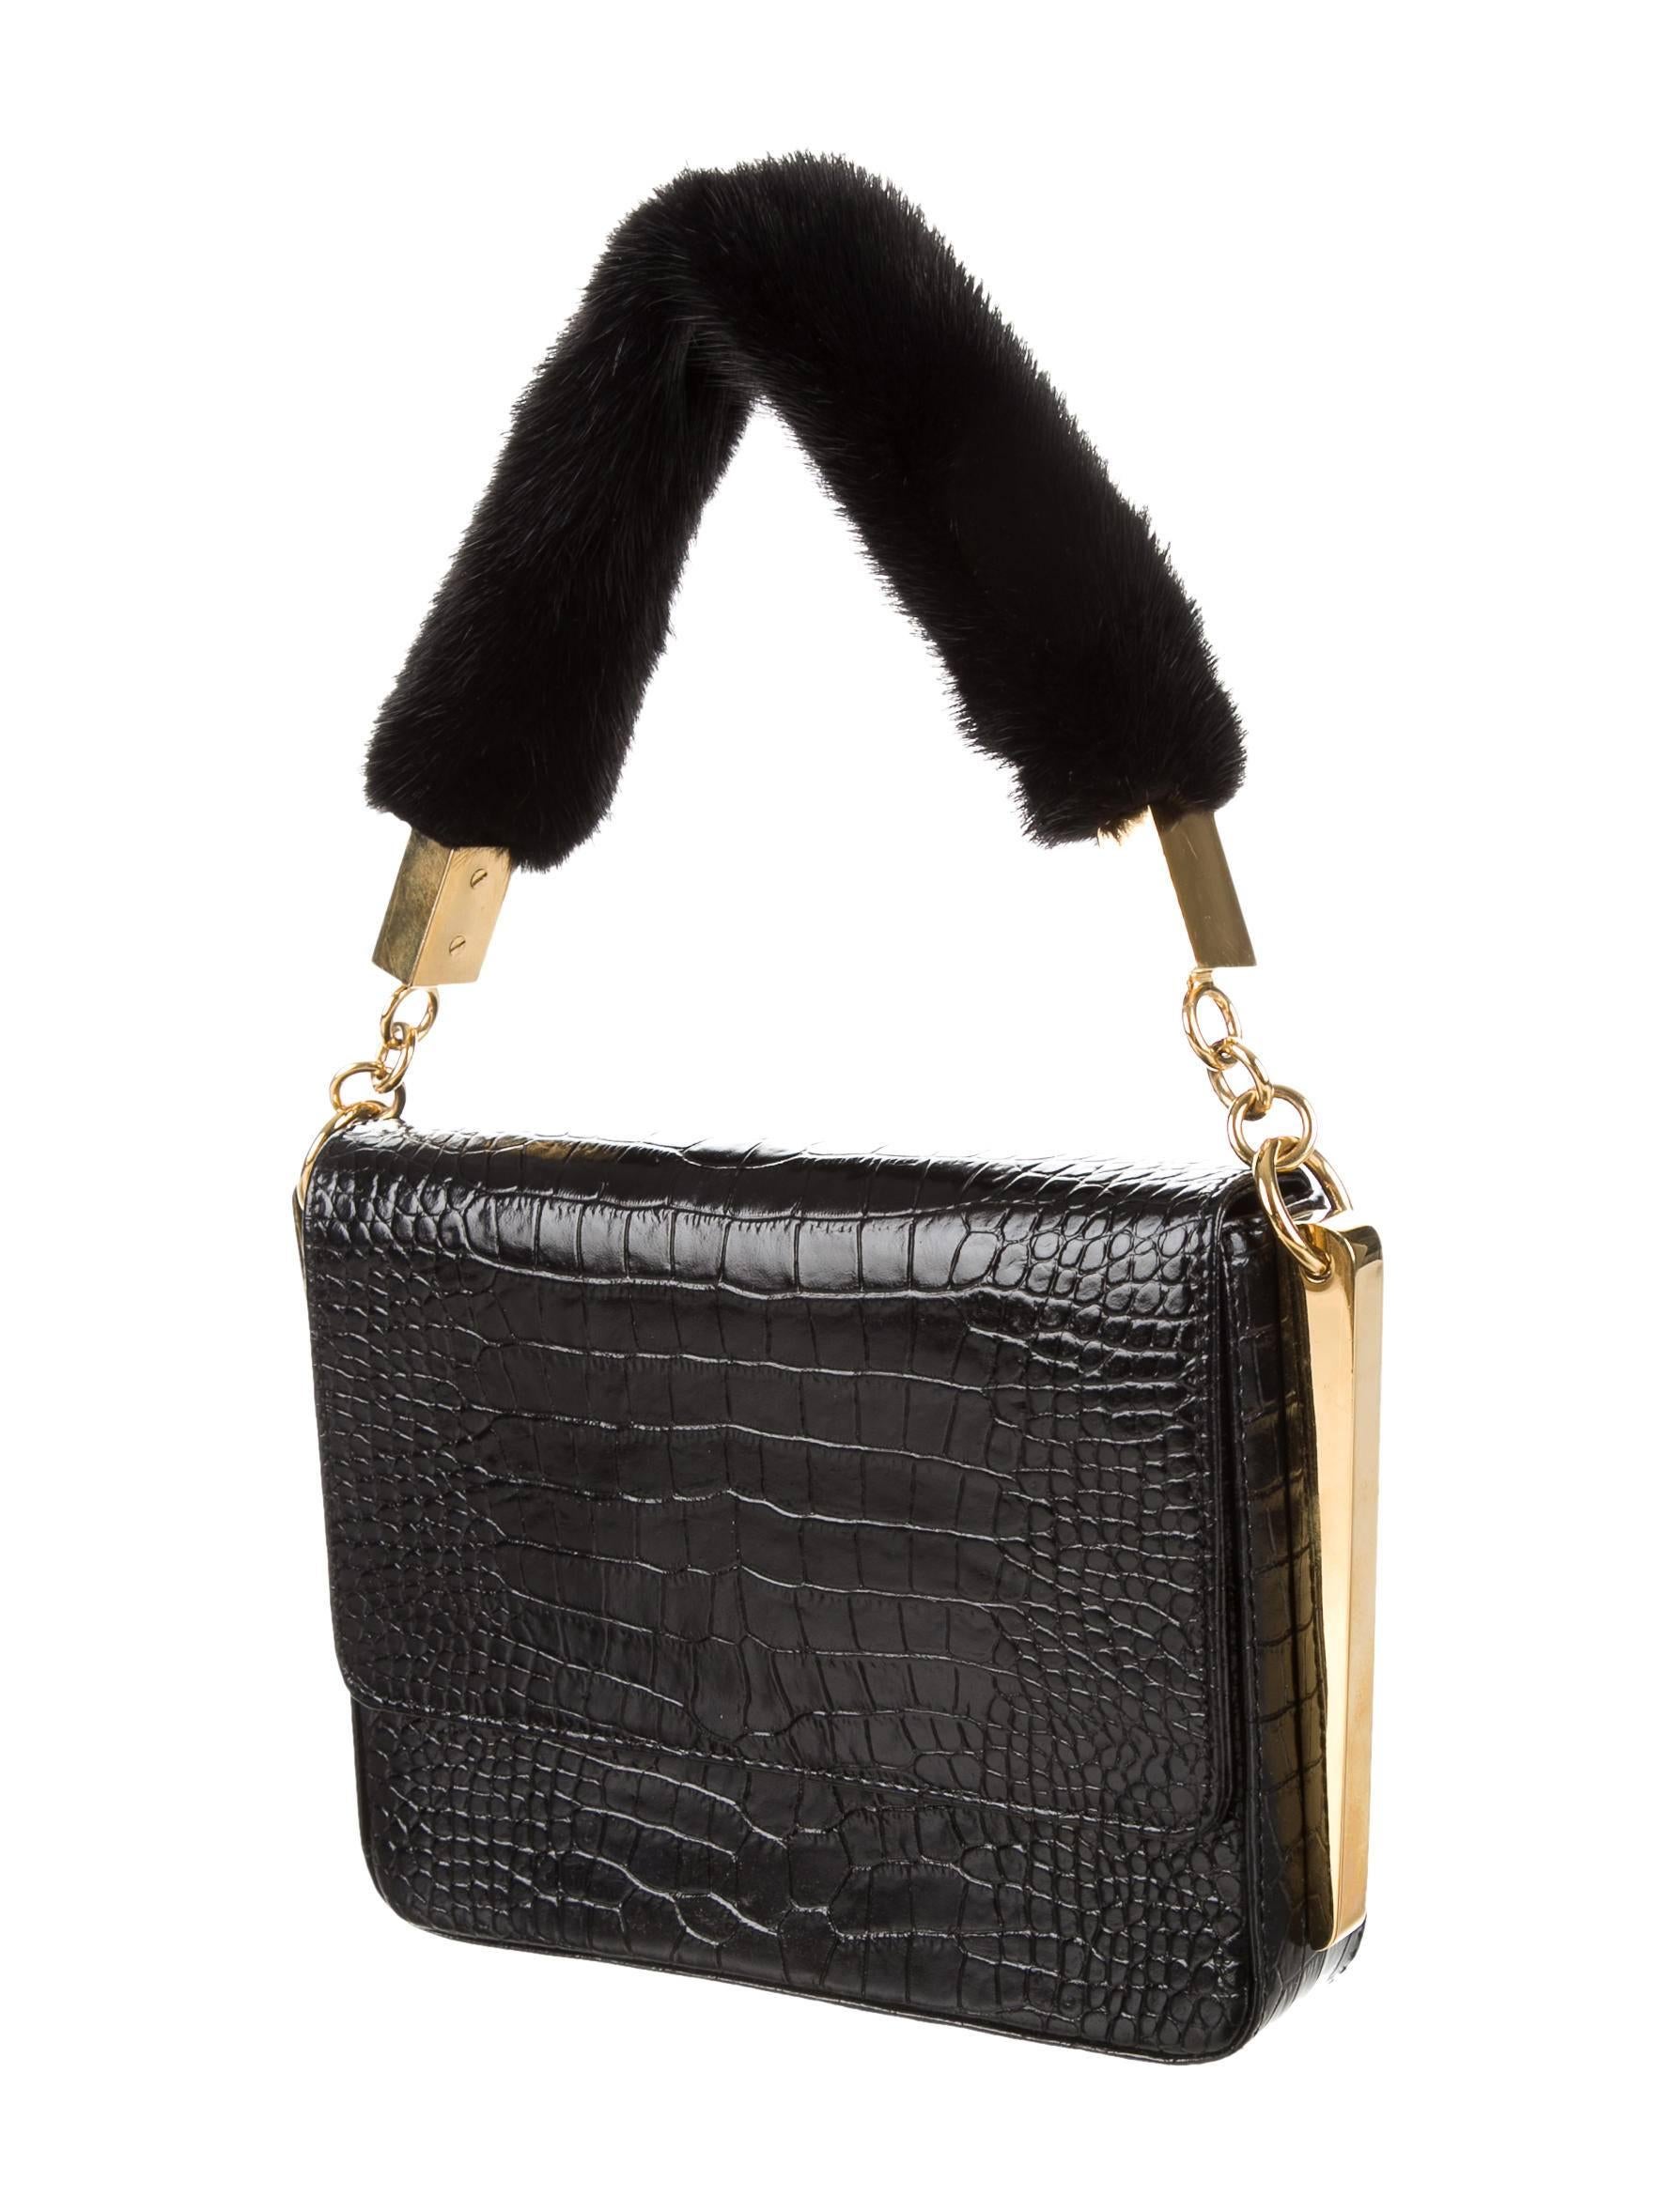 CURATOR'S NOTES

Giuseppe Zanotti Black Leather Gold Fur Evening Top Handle Shoulder Flap Bag  

Leather
Mink fur
Gold tone hardware
Woven lining 
Snap closure
Made in Italy
Shoulder handle strap drop 6"
Measures 7.75" W x 6" H x